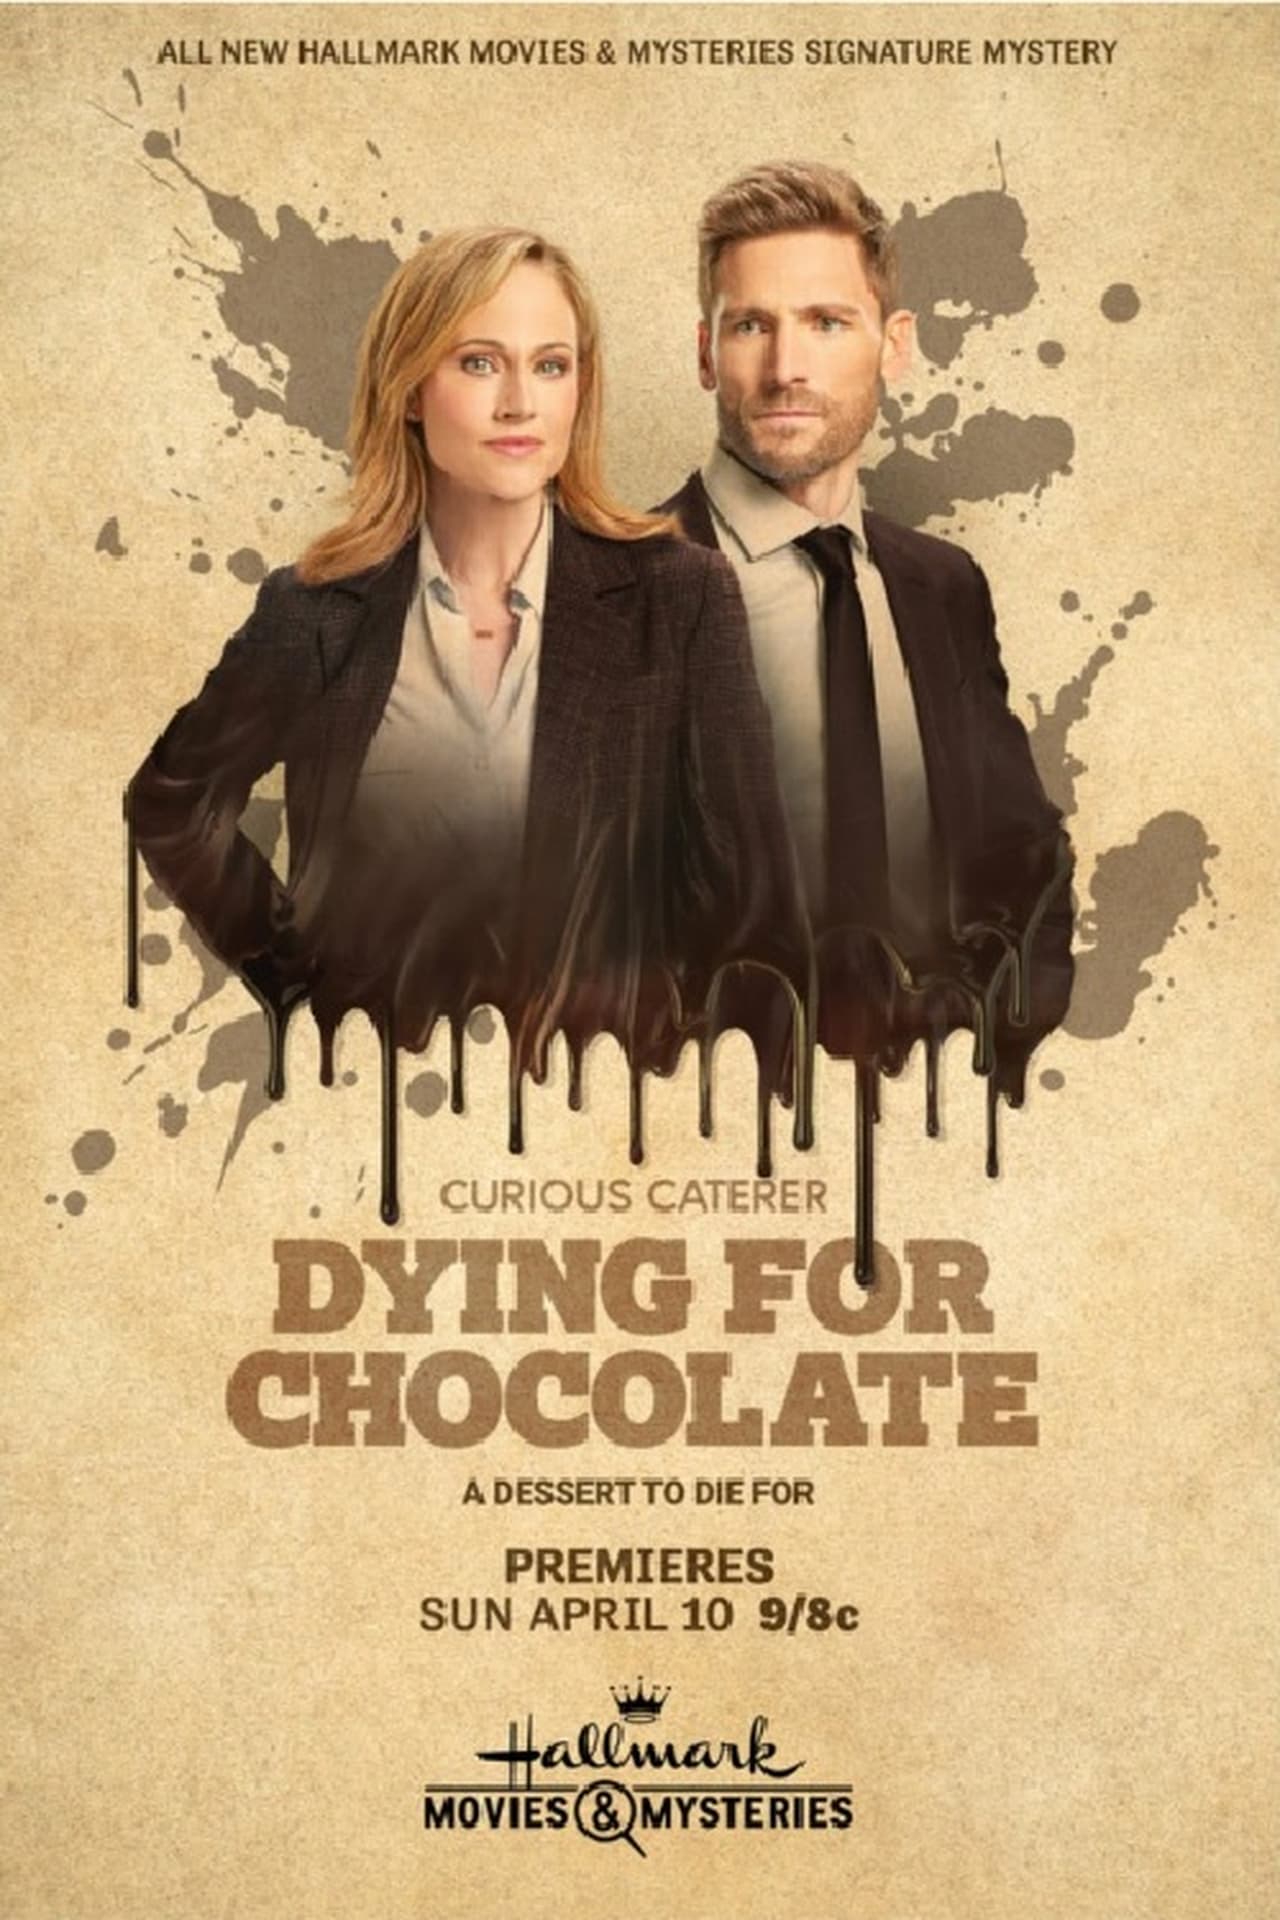 EN - Curious Caterer: Dying For Chocolate (2022) Hallmark